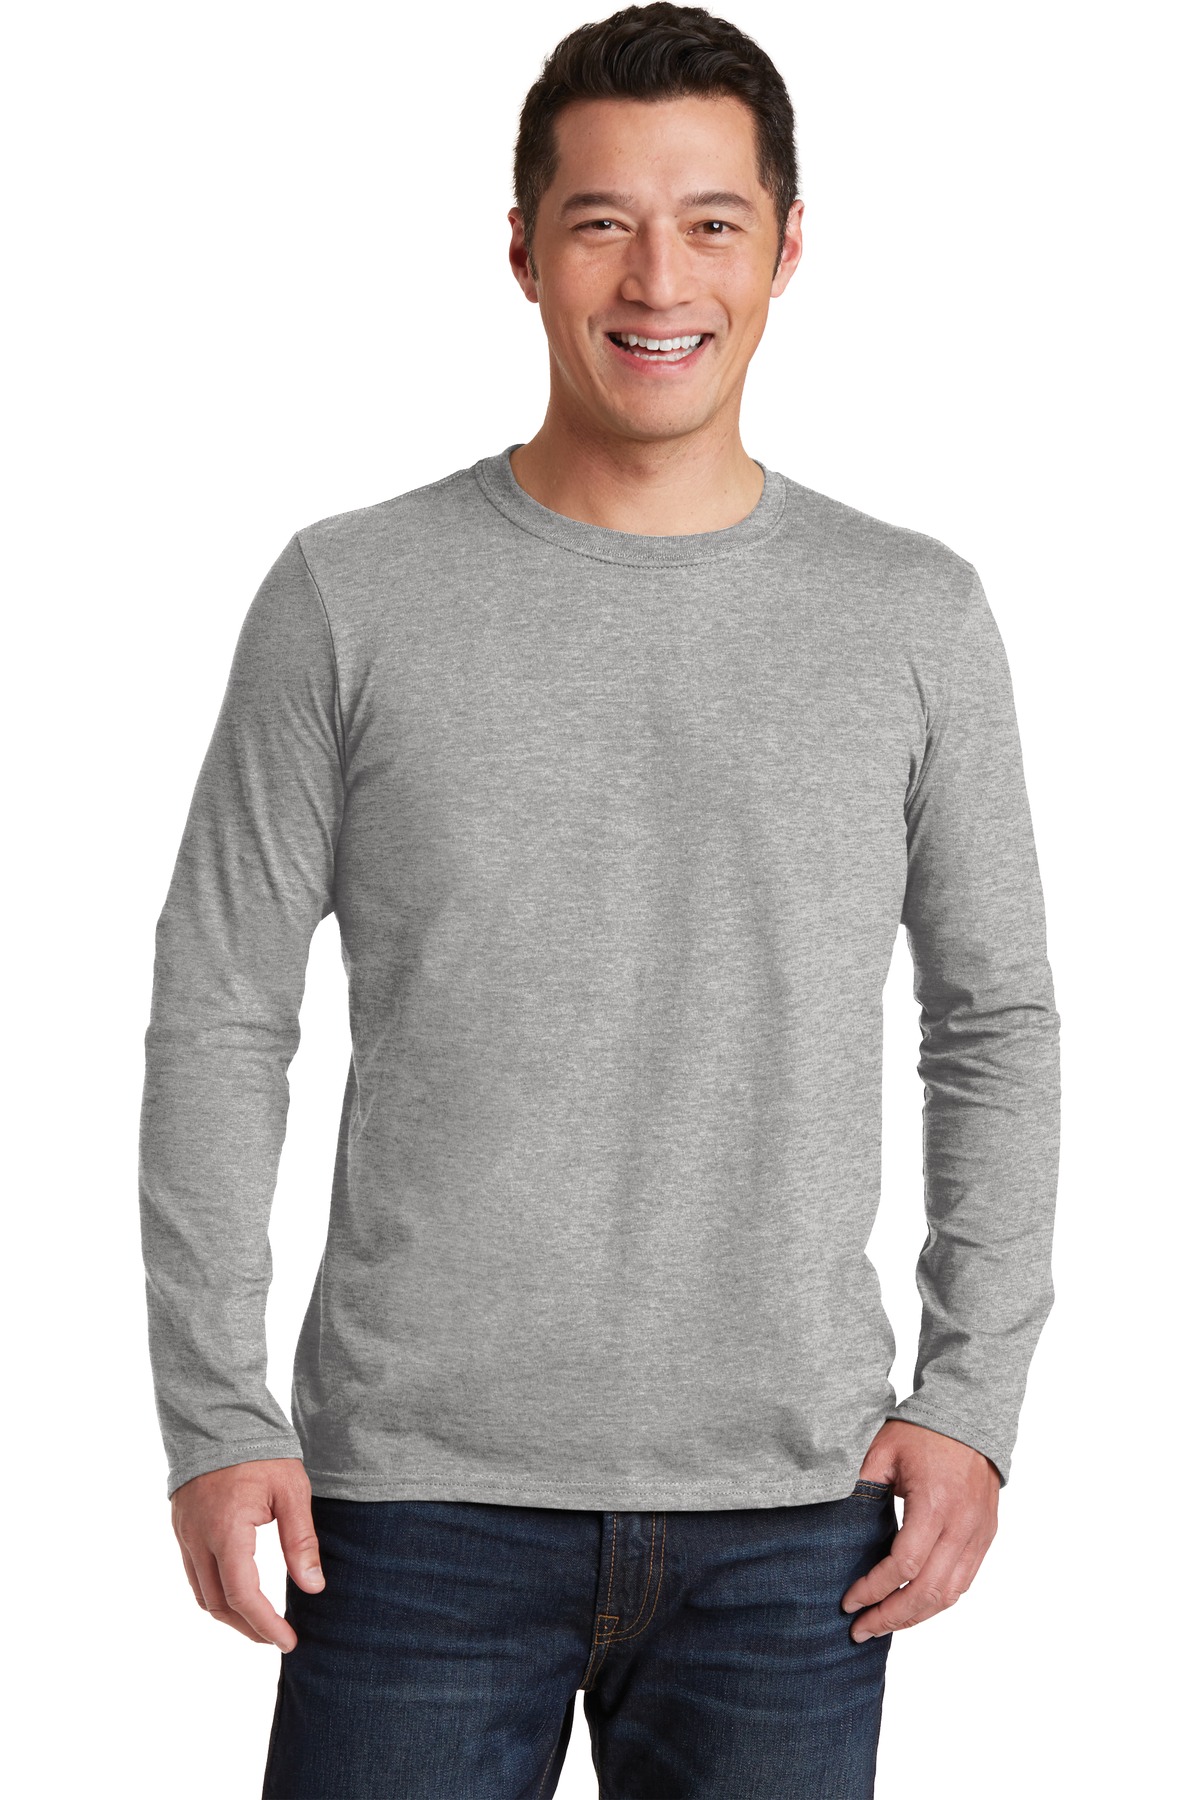 64400 ADULT Long Sleeve T-Shirt for Gym